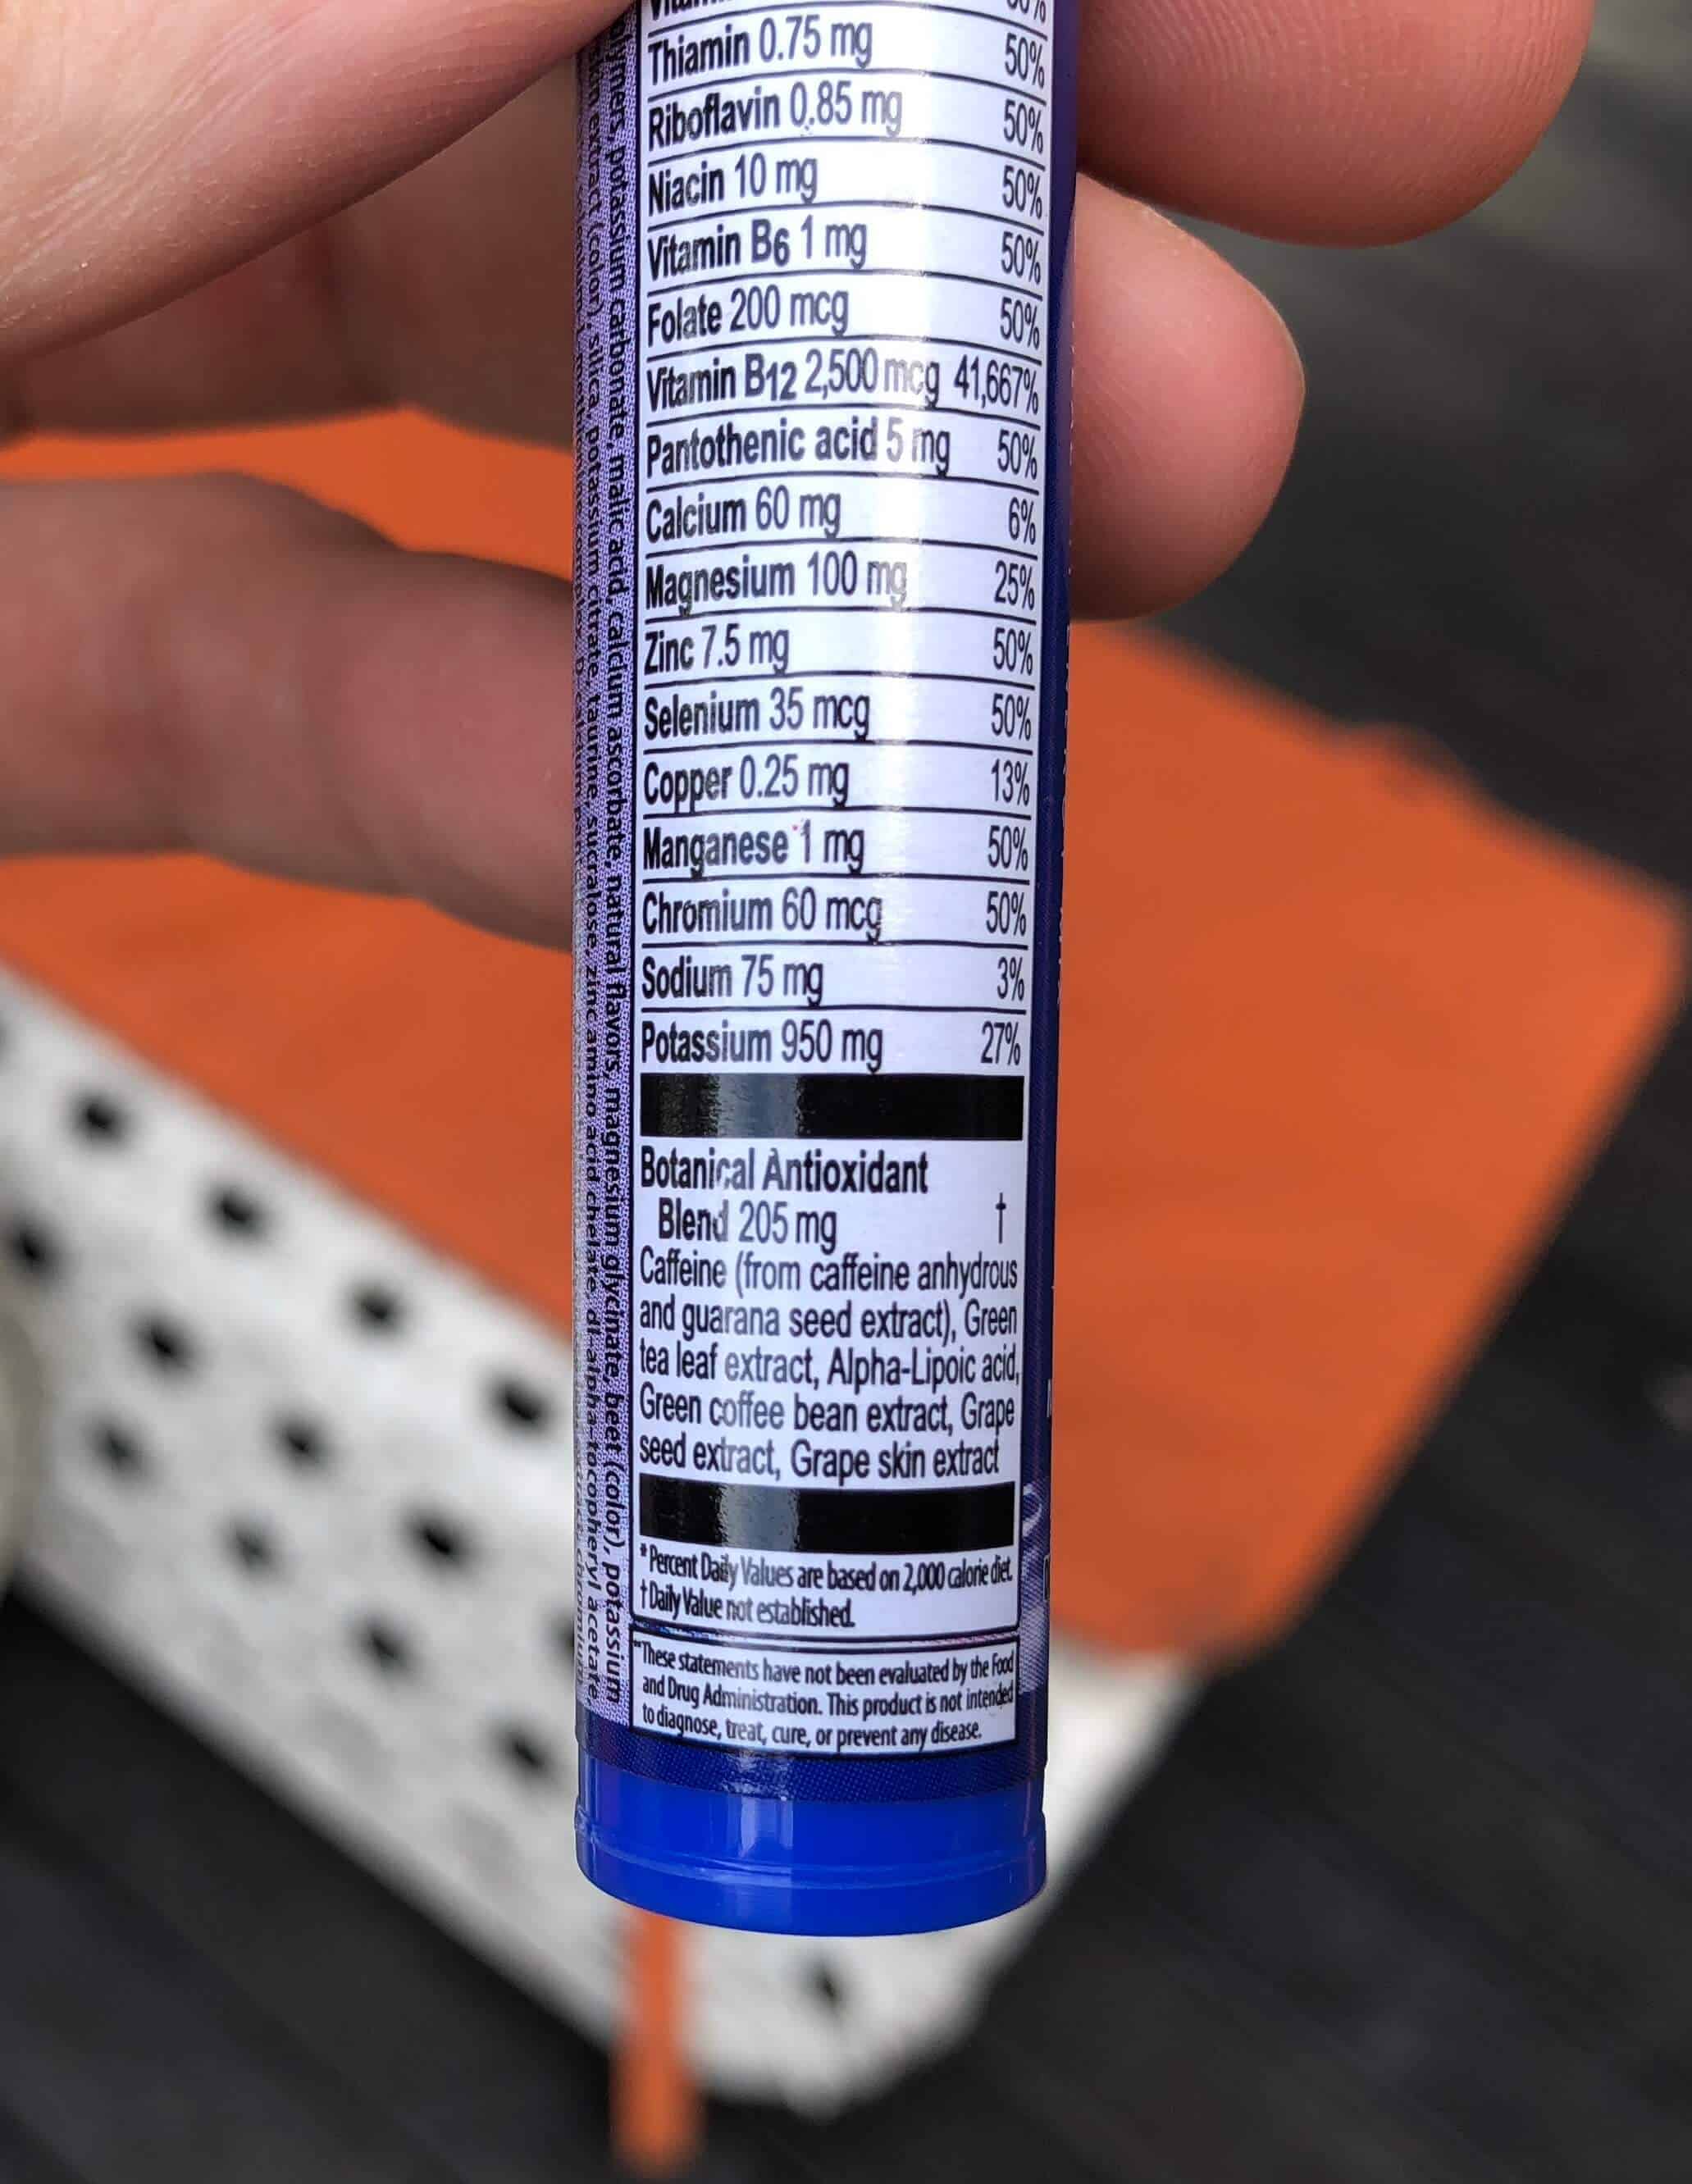 The ingredients label on the back of a Zipfizz tube.